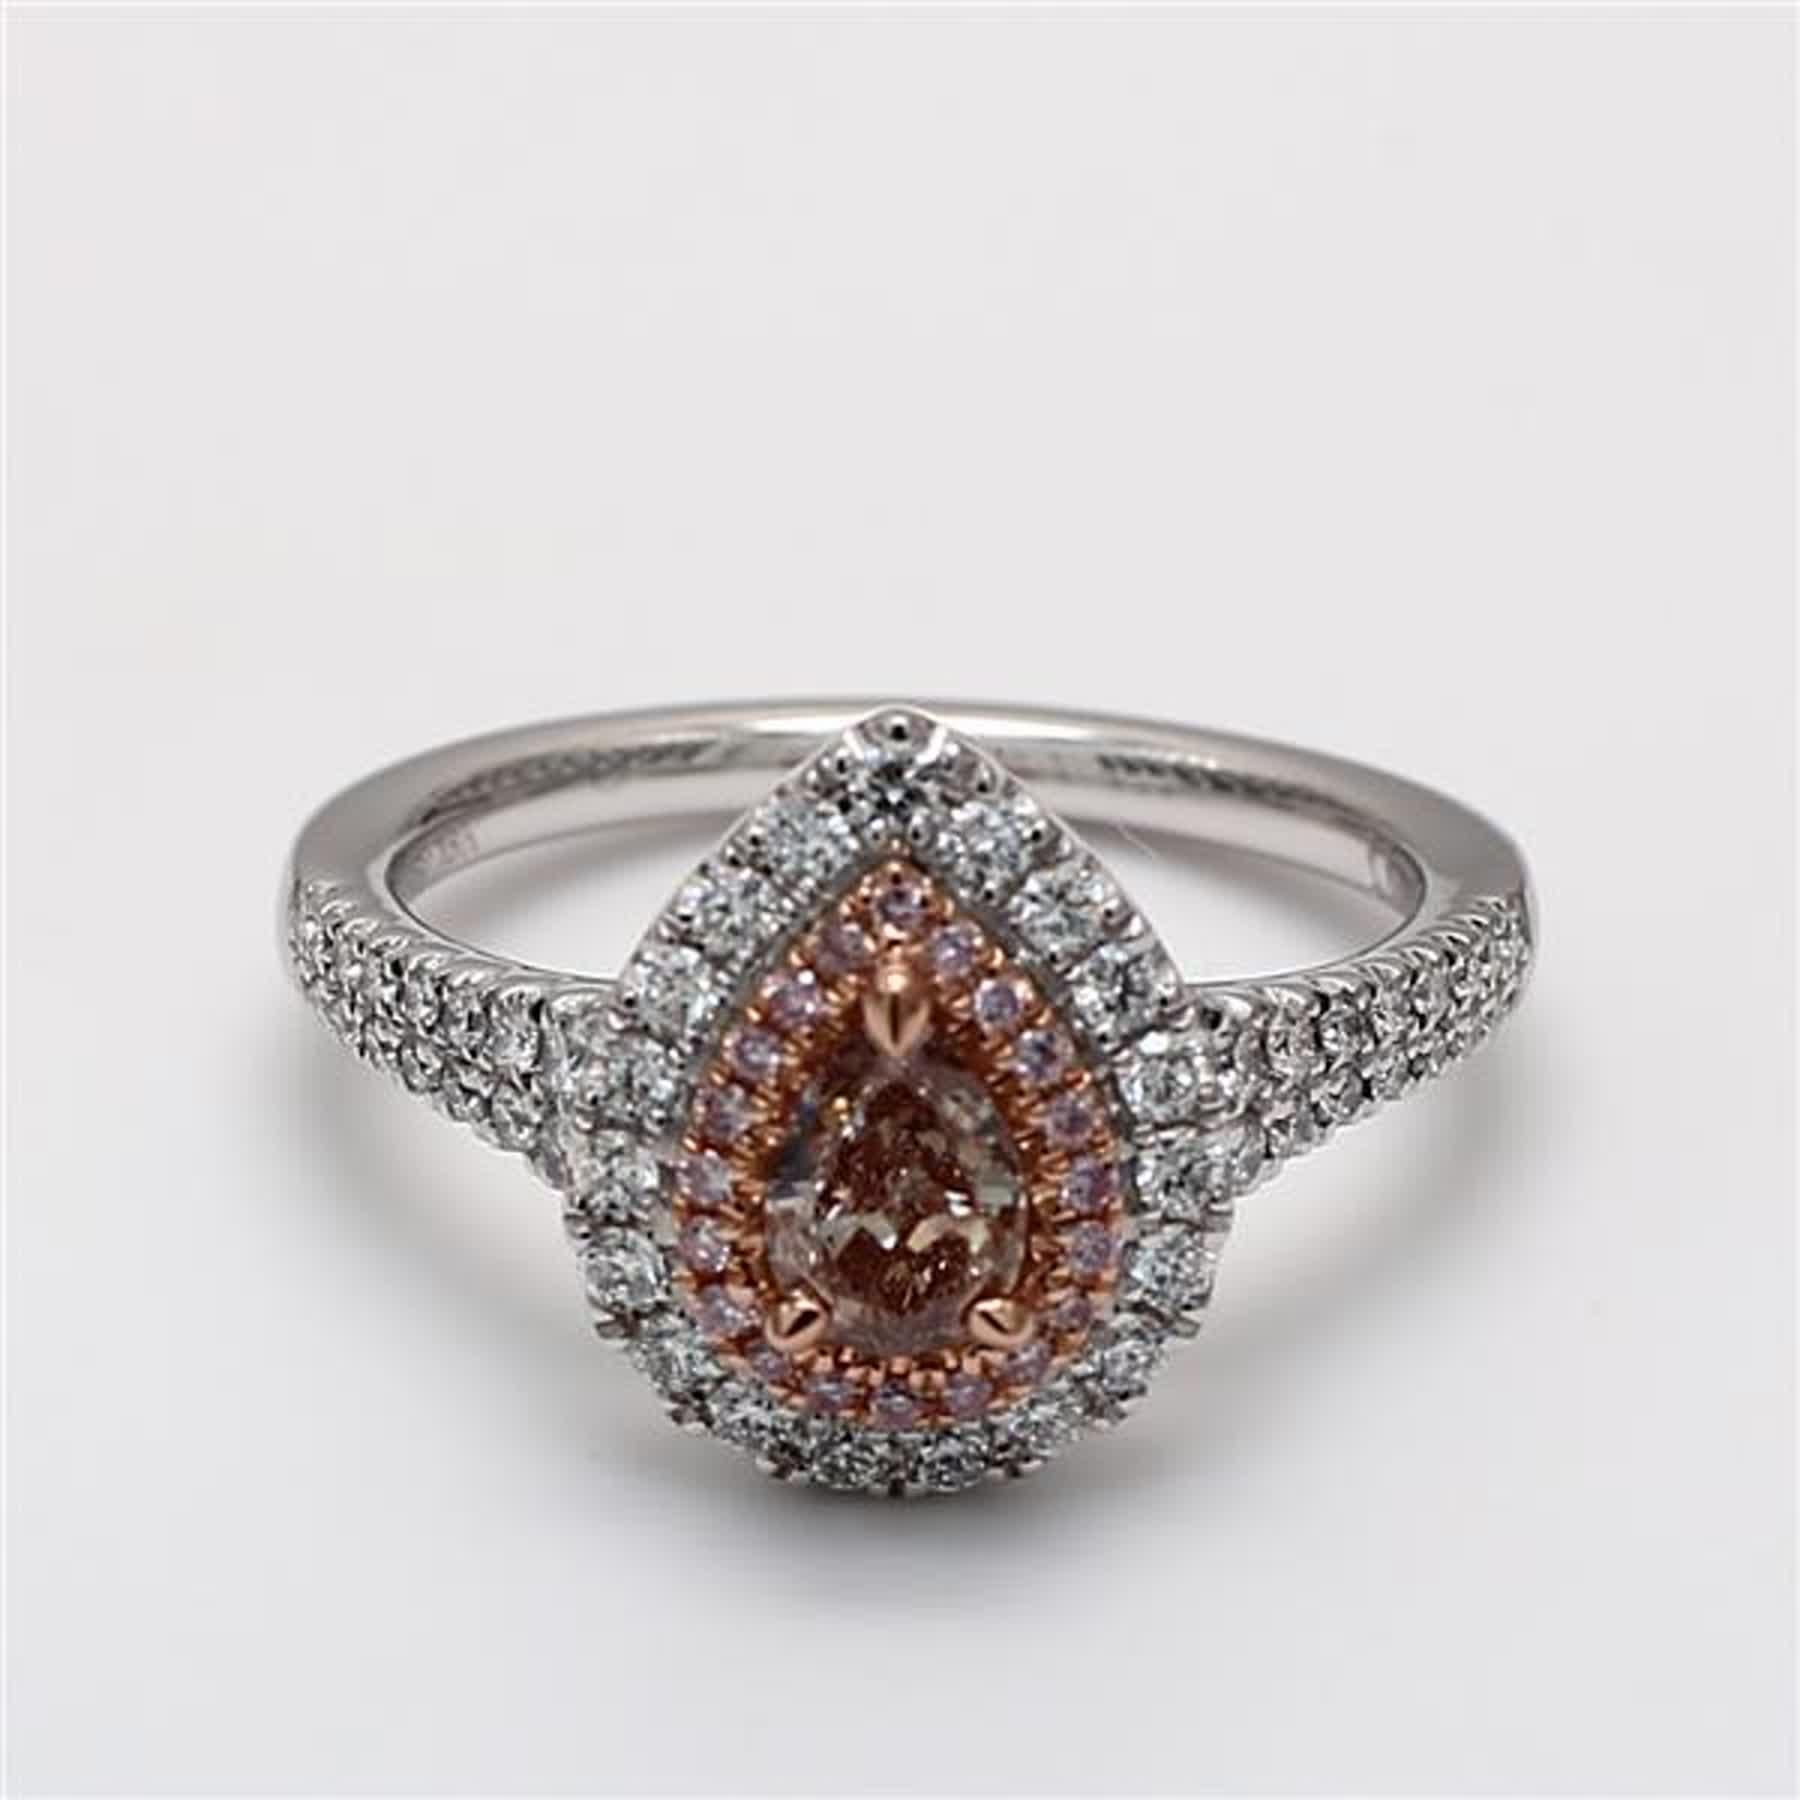 RareGemWorld's classic GIA certified diamond ring. Mounted in a beautiful 18K Rose and White Gold and Platinum setting with a natural pear cut brown diamond. The brown diamond is surrounded by round natural pink diamond melee and round natural white